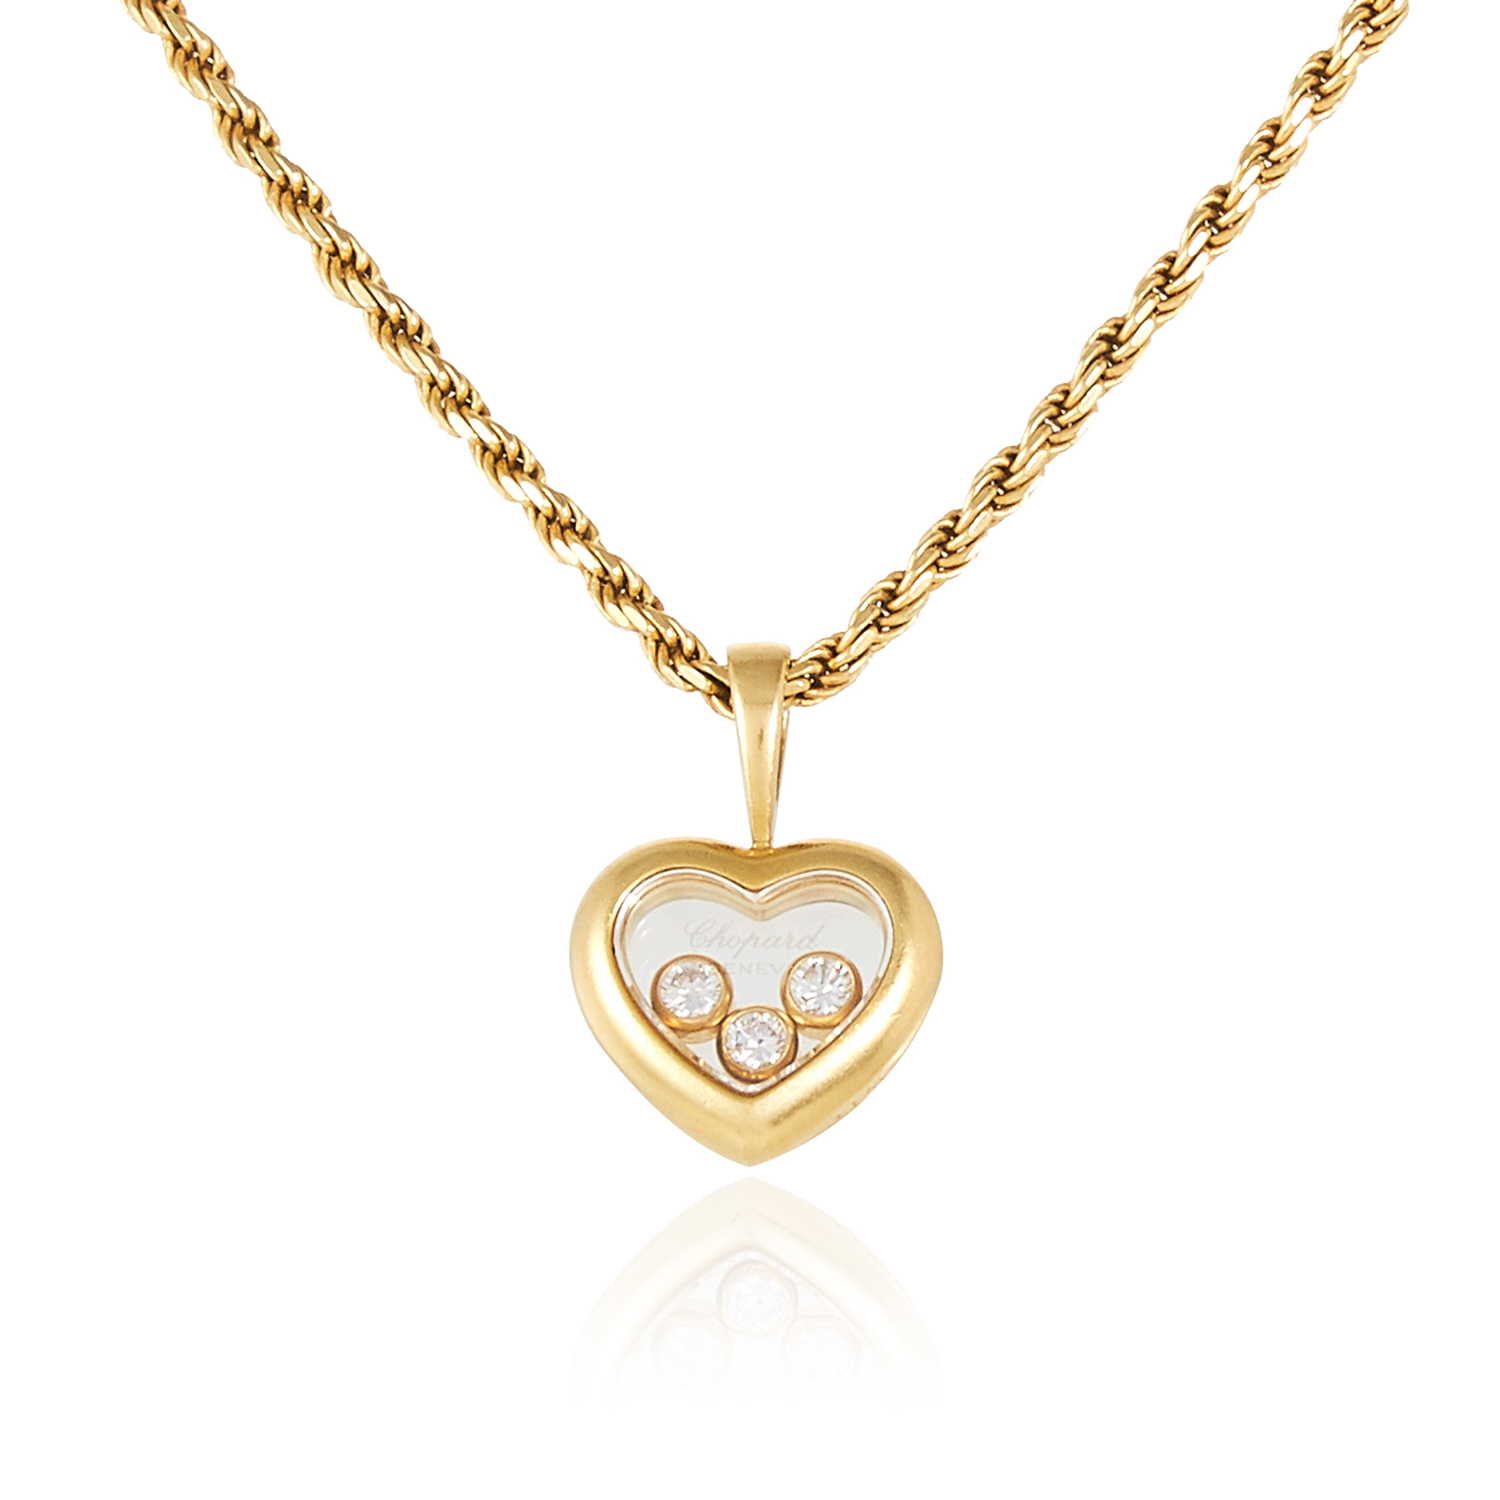 A HAPPY DIAMOND HEART PENDANT AND CHAIN, CHOPARD in 18ct yellow gold, designed as a heart with a